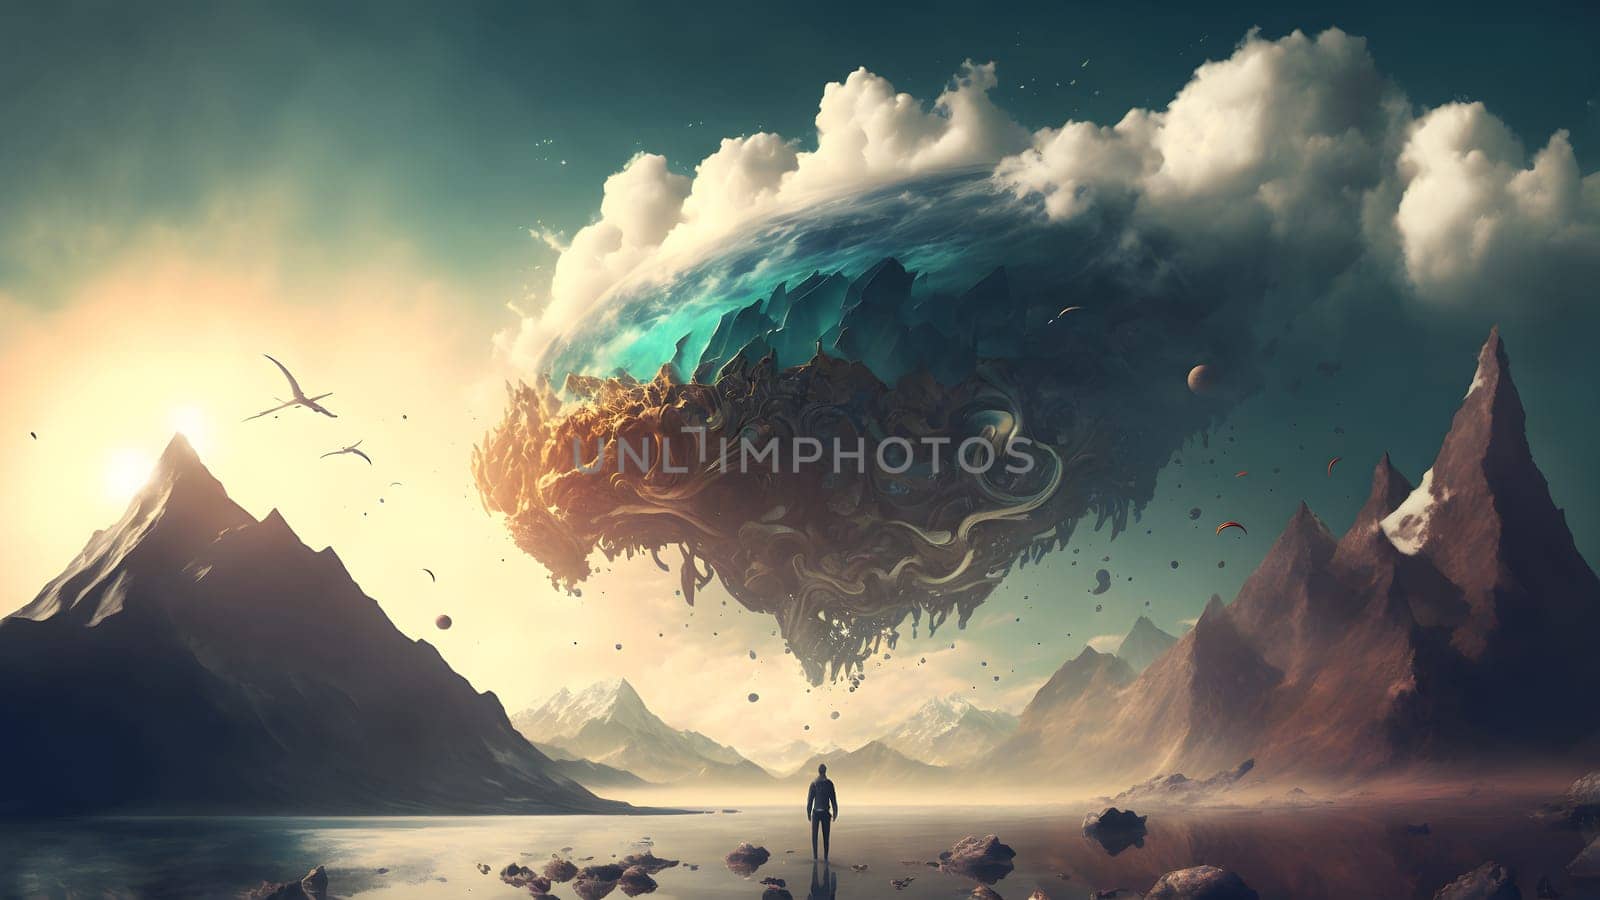 human silhouette in fantastic landscape in front of strange floating island entity, neural network generated wallpaper art. Digitally generated image. Not based on any actual person, scene or pattern.